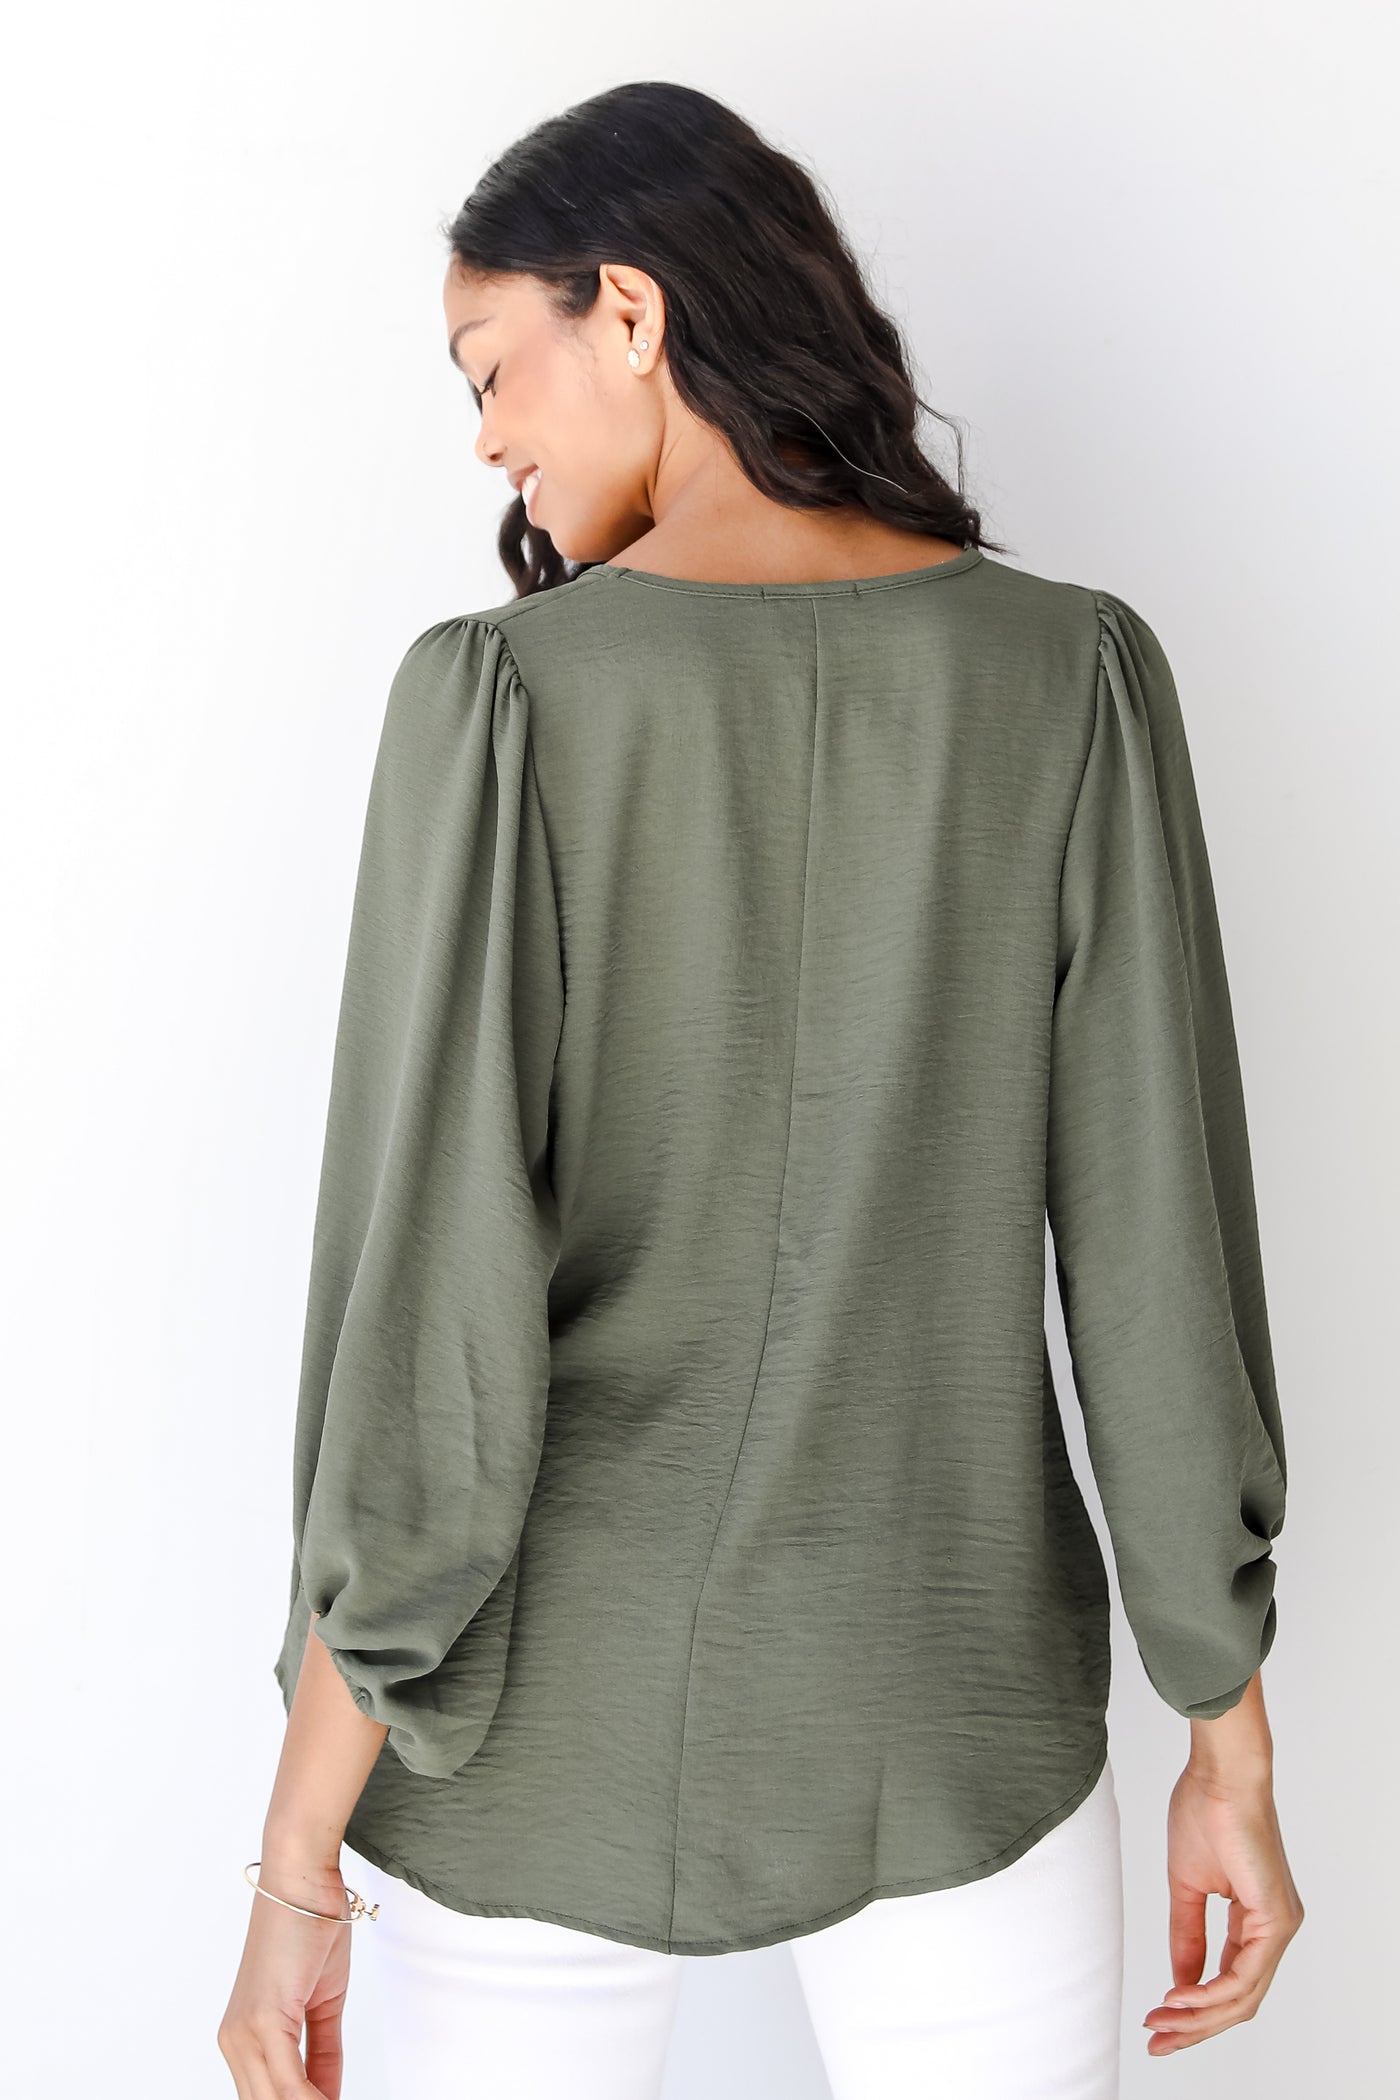 green Blouse back view